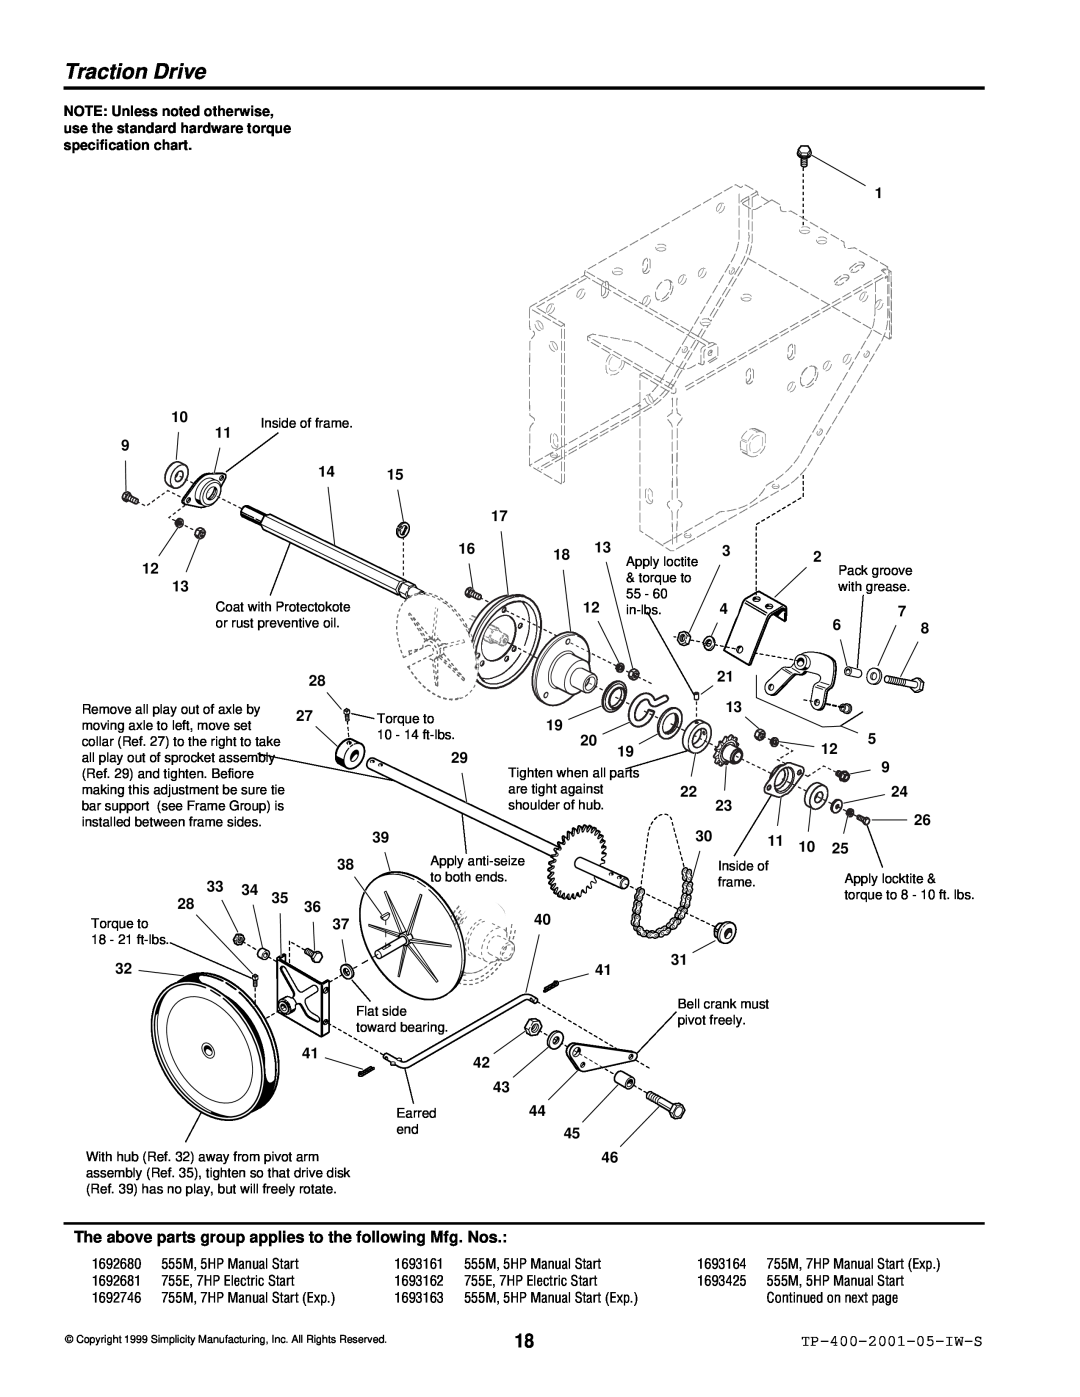 Simplicity 1692680 Traction Drive, The above parts group applies to the following Mfg. Nos, TP-400-2001-05-IW-S, 2835 